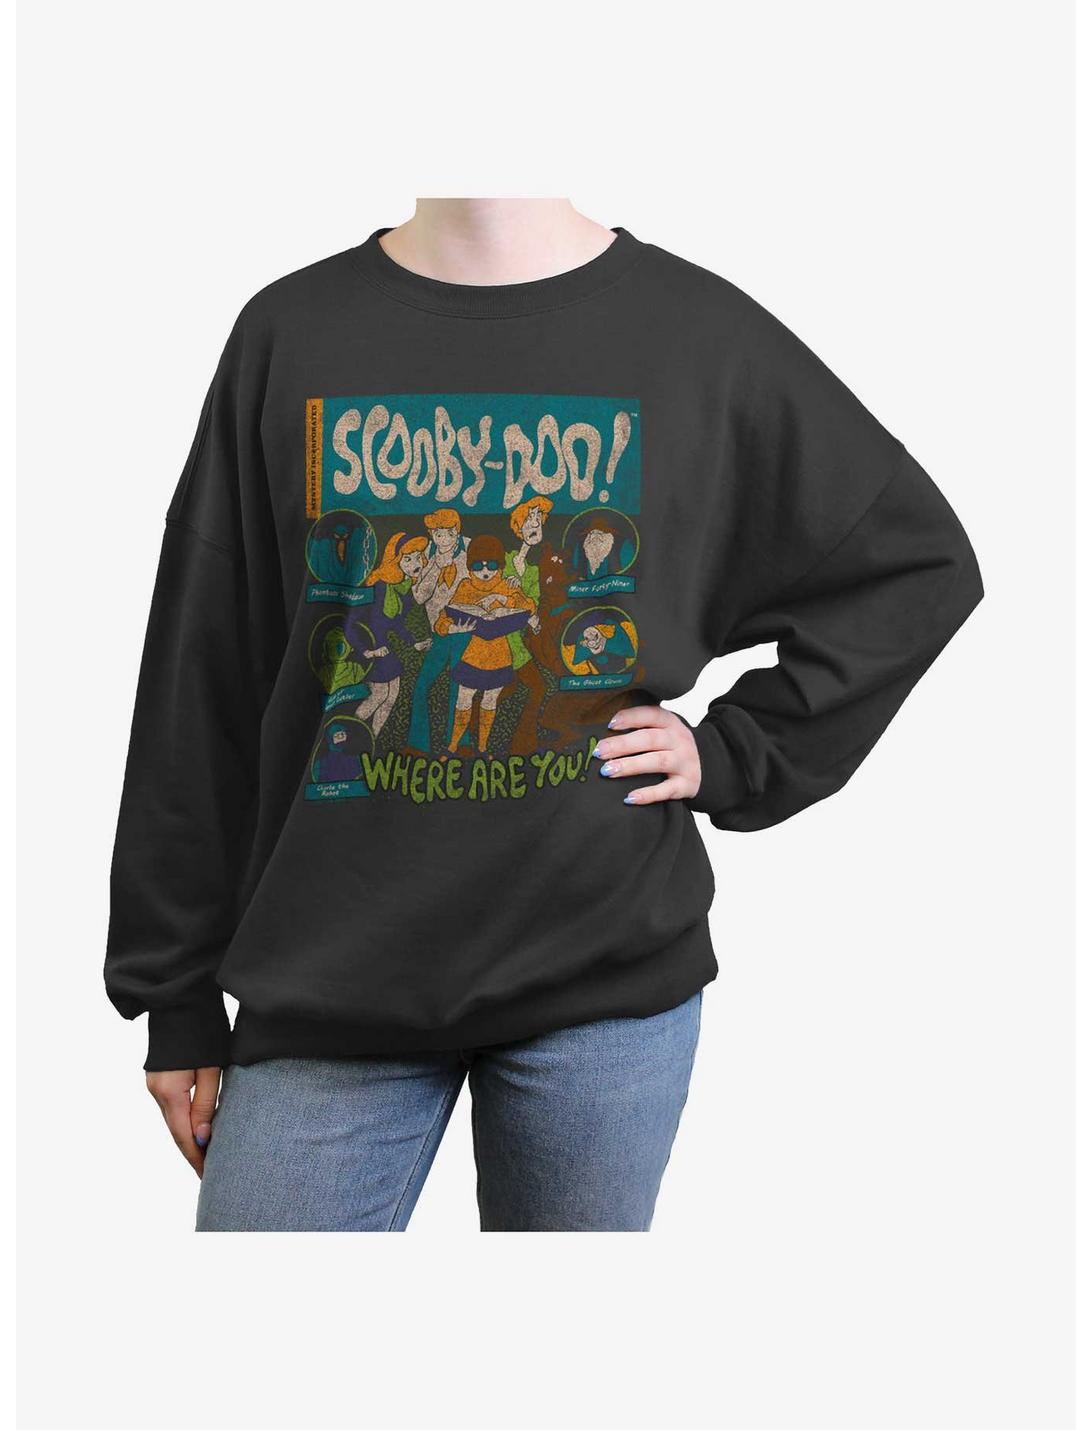 Scooby Doo Mystery Poster Womens Oversized Sweatshirt, CHARCOAL, hi-res